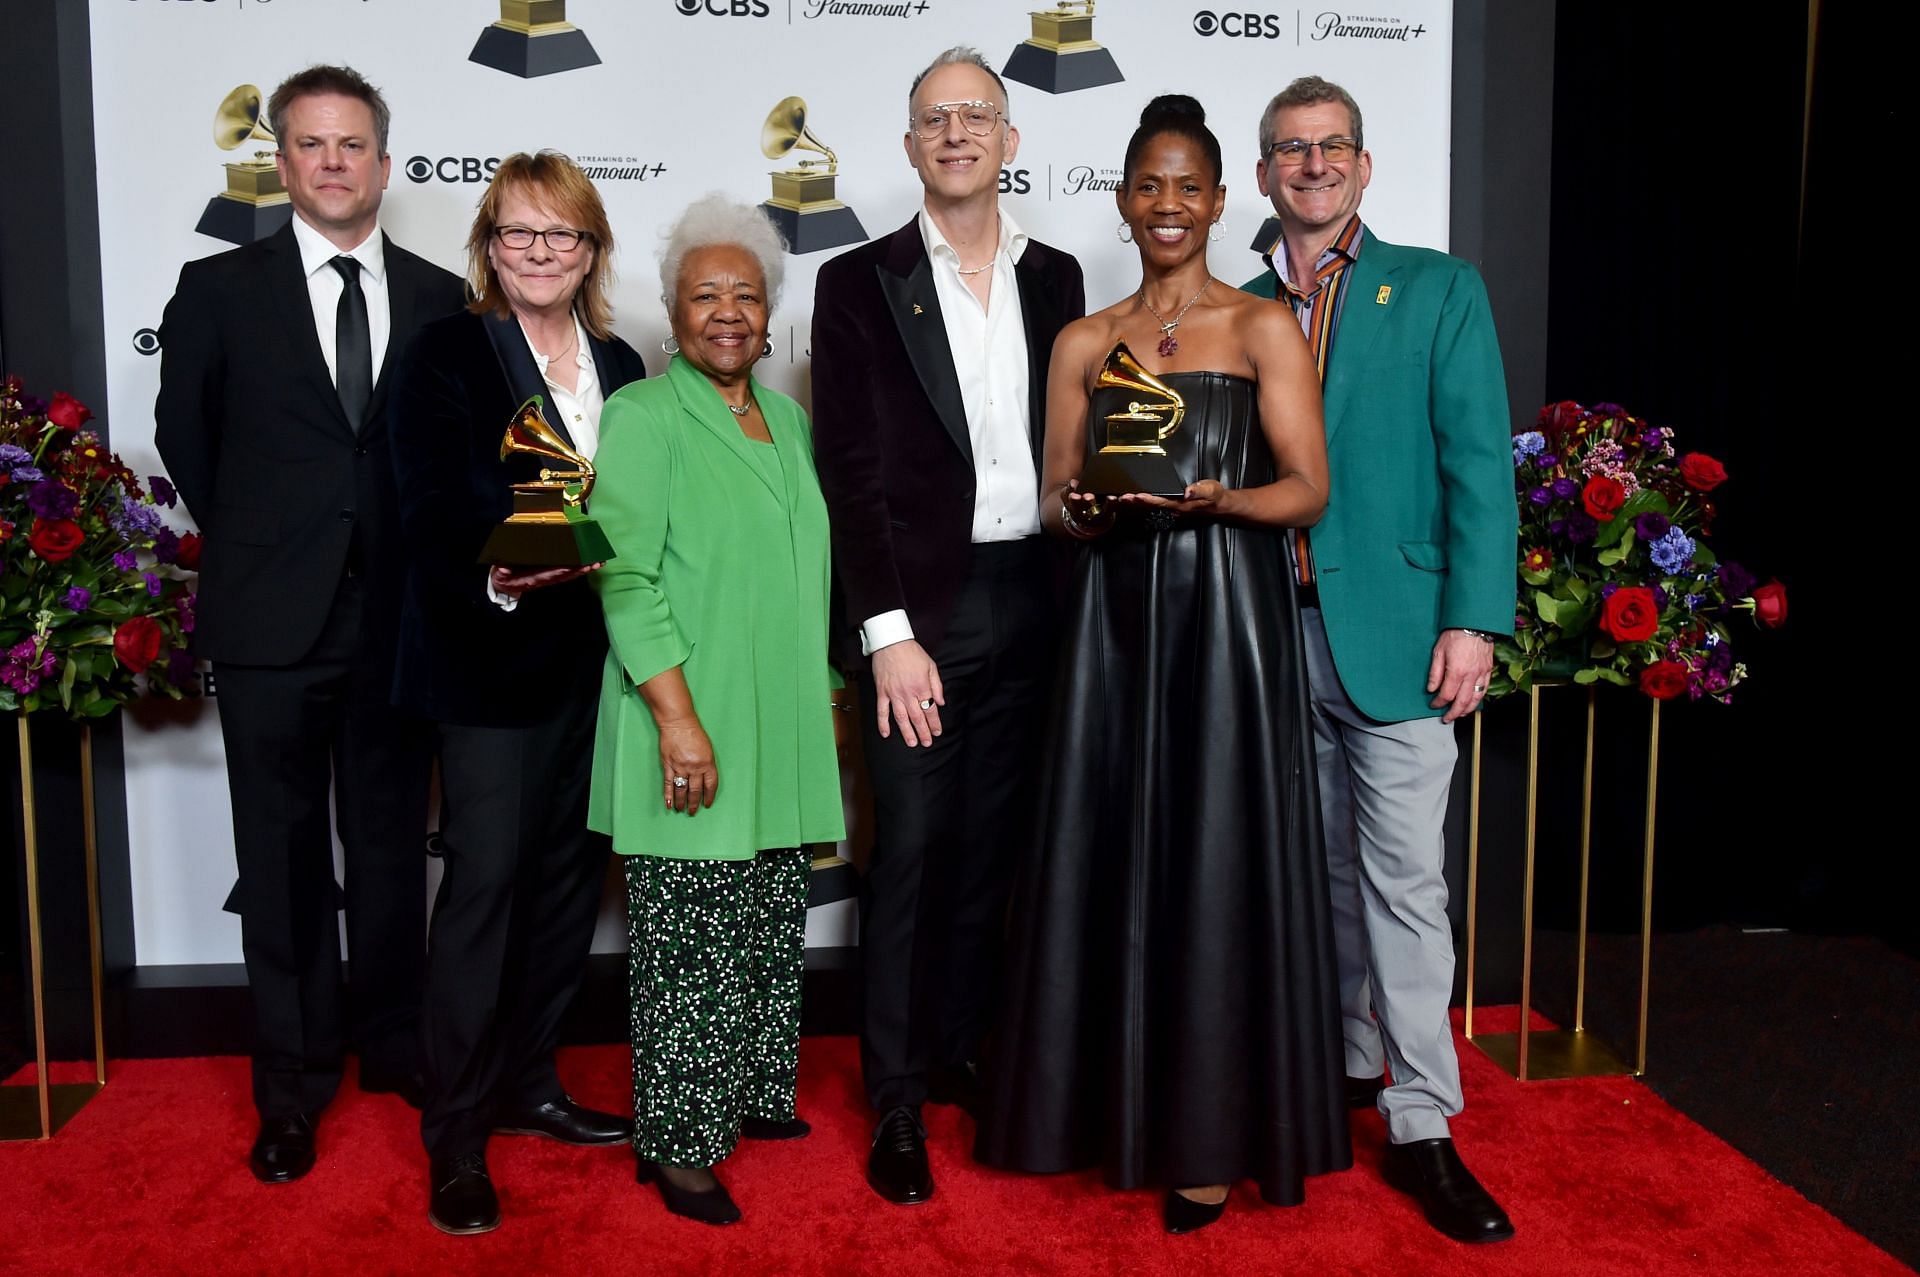 LOS ANGELES, CALIFORNIA - FEBRUARY 04: (L-R) Cheryl Pawelski, Deanie Parker, Michael Graves, Michele Smith and Robert Gordon, winners of the &quot;Best Historical Album&quot; award for &quot;Written In Their Soul: The Stax Songwriter Demos&quot;, and &quot;Best Album Notes&quot; award for &quot;Written In Their Soul: The Stax Songwriter Demos&quot;, pose in the press room during the 66th GRAMMY Awards (Photo by Alberto E. Rodriguez/Getty Images)